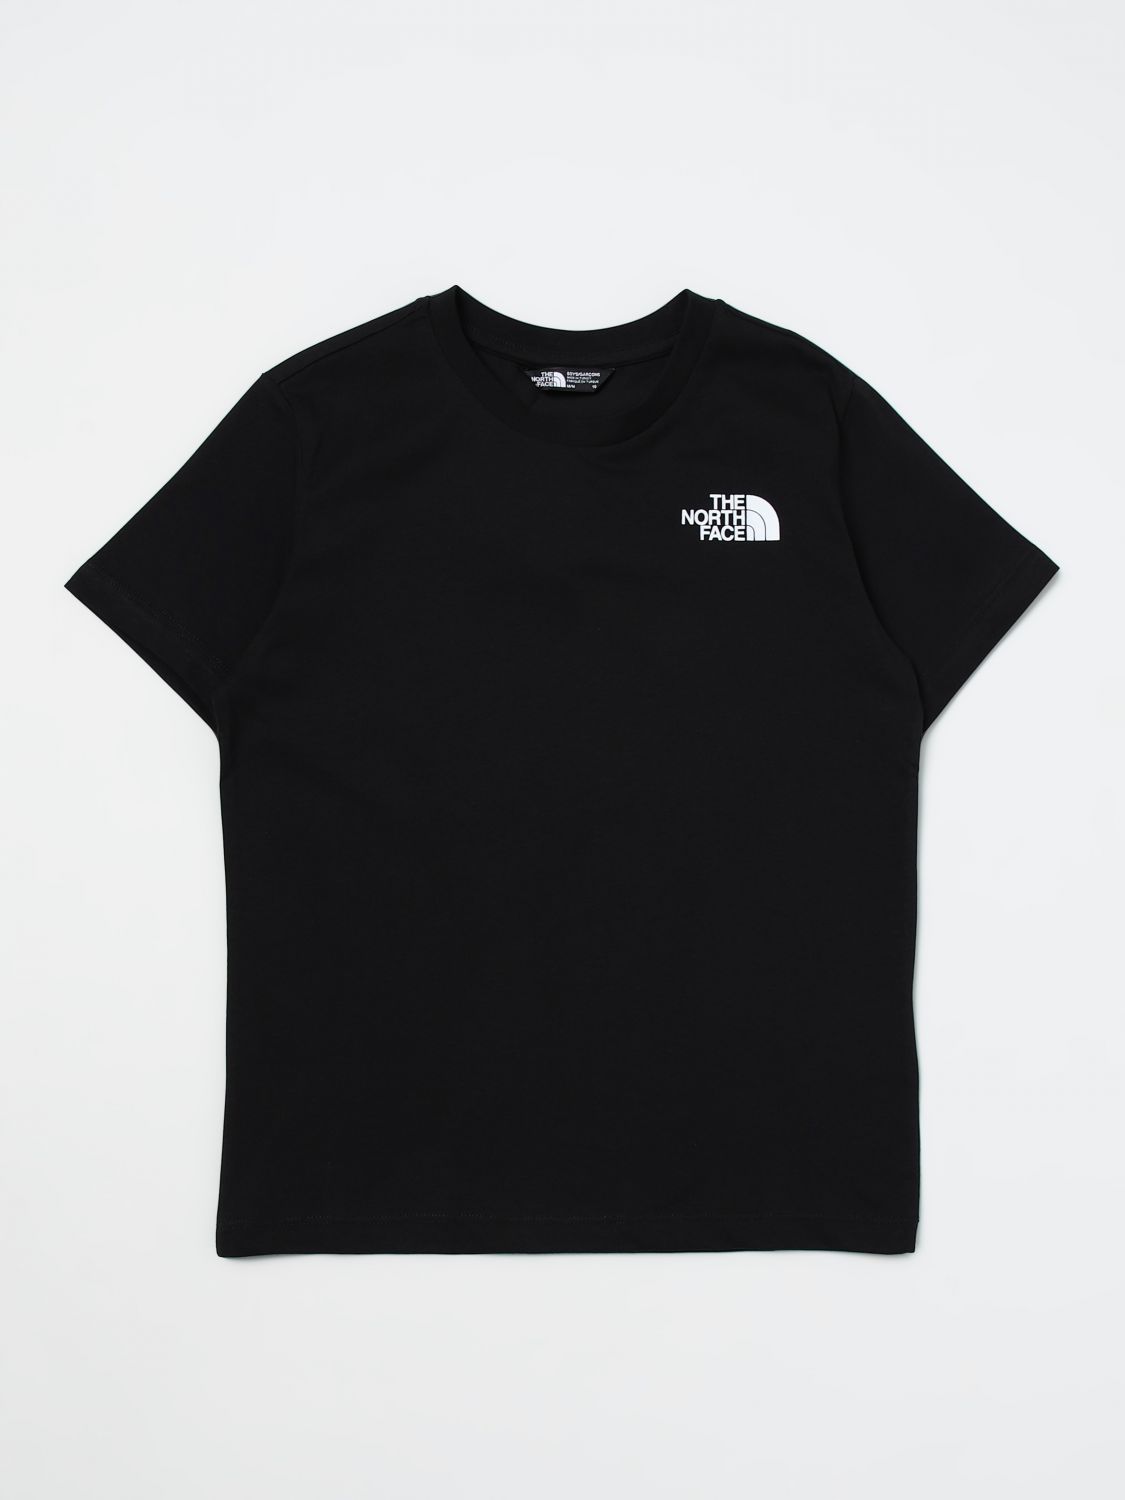 The North Face T-Shirt THE NORTH FACE Kids color Black